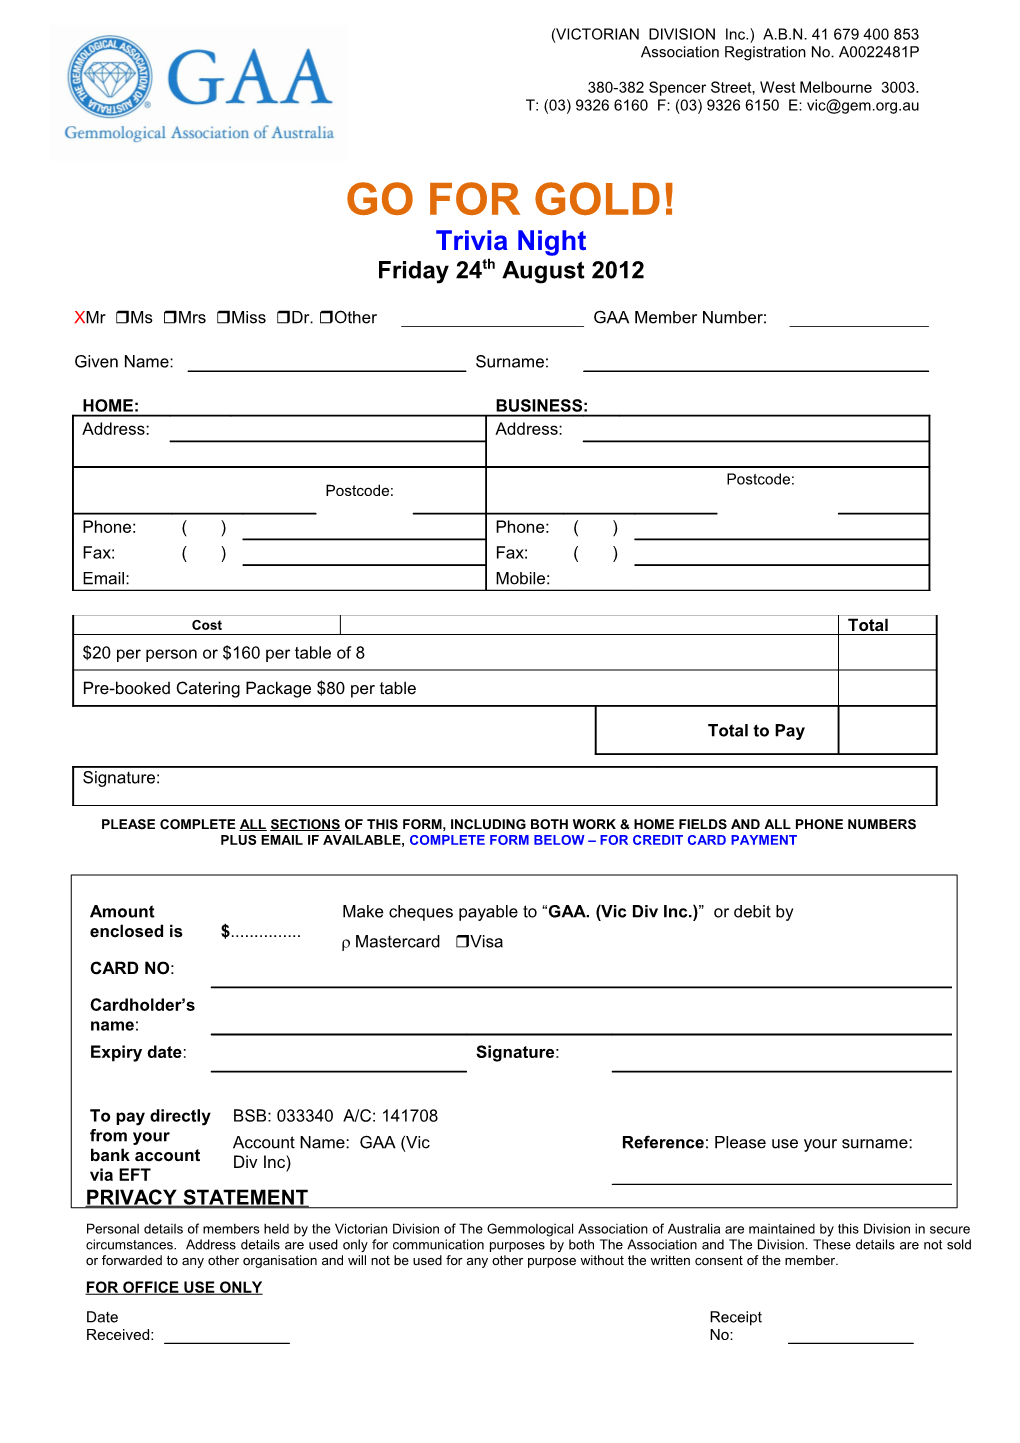 Please Complete All Sections of This Form, Including Both Work & Home Fields and All Phone